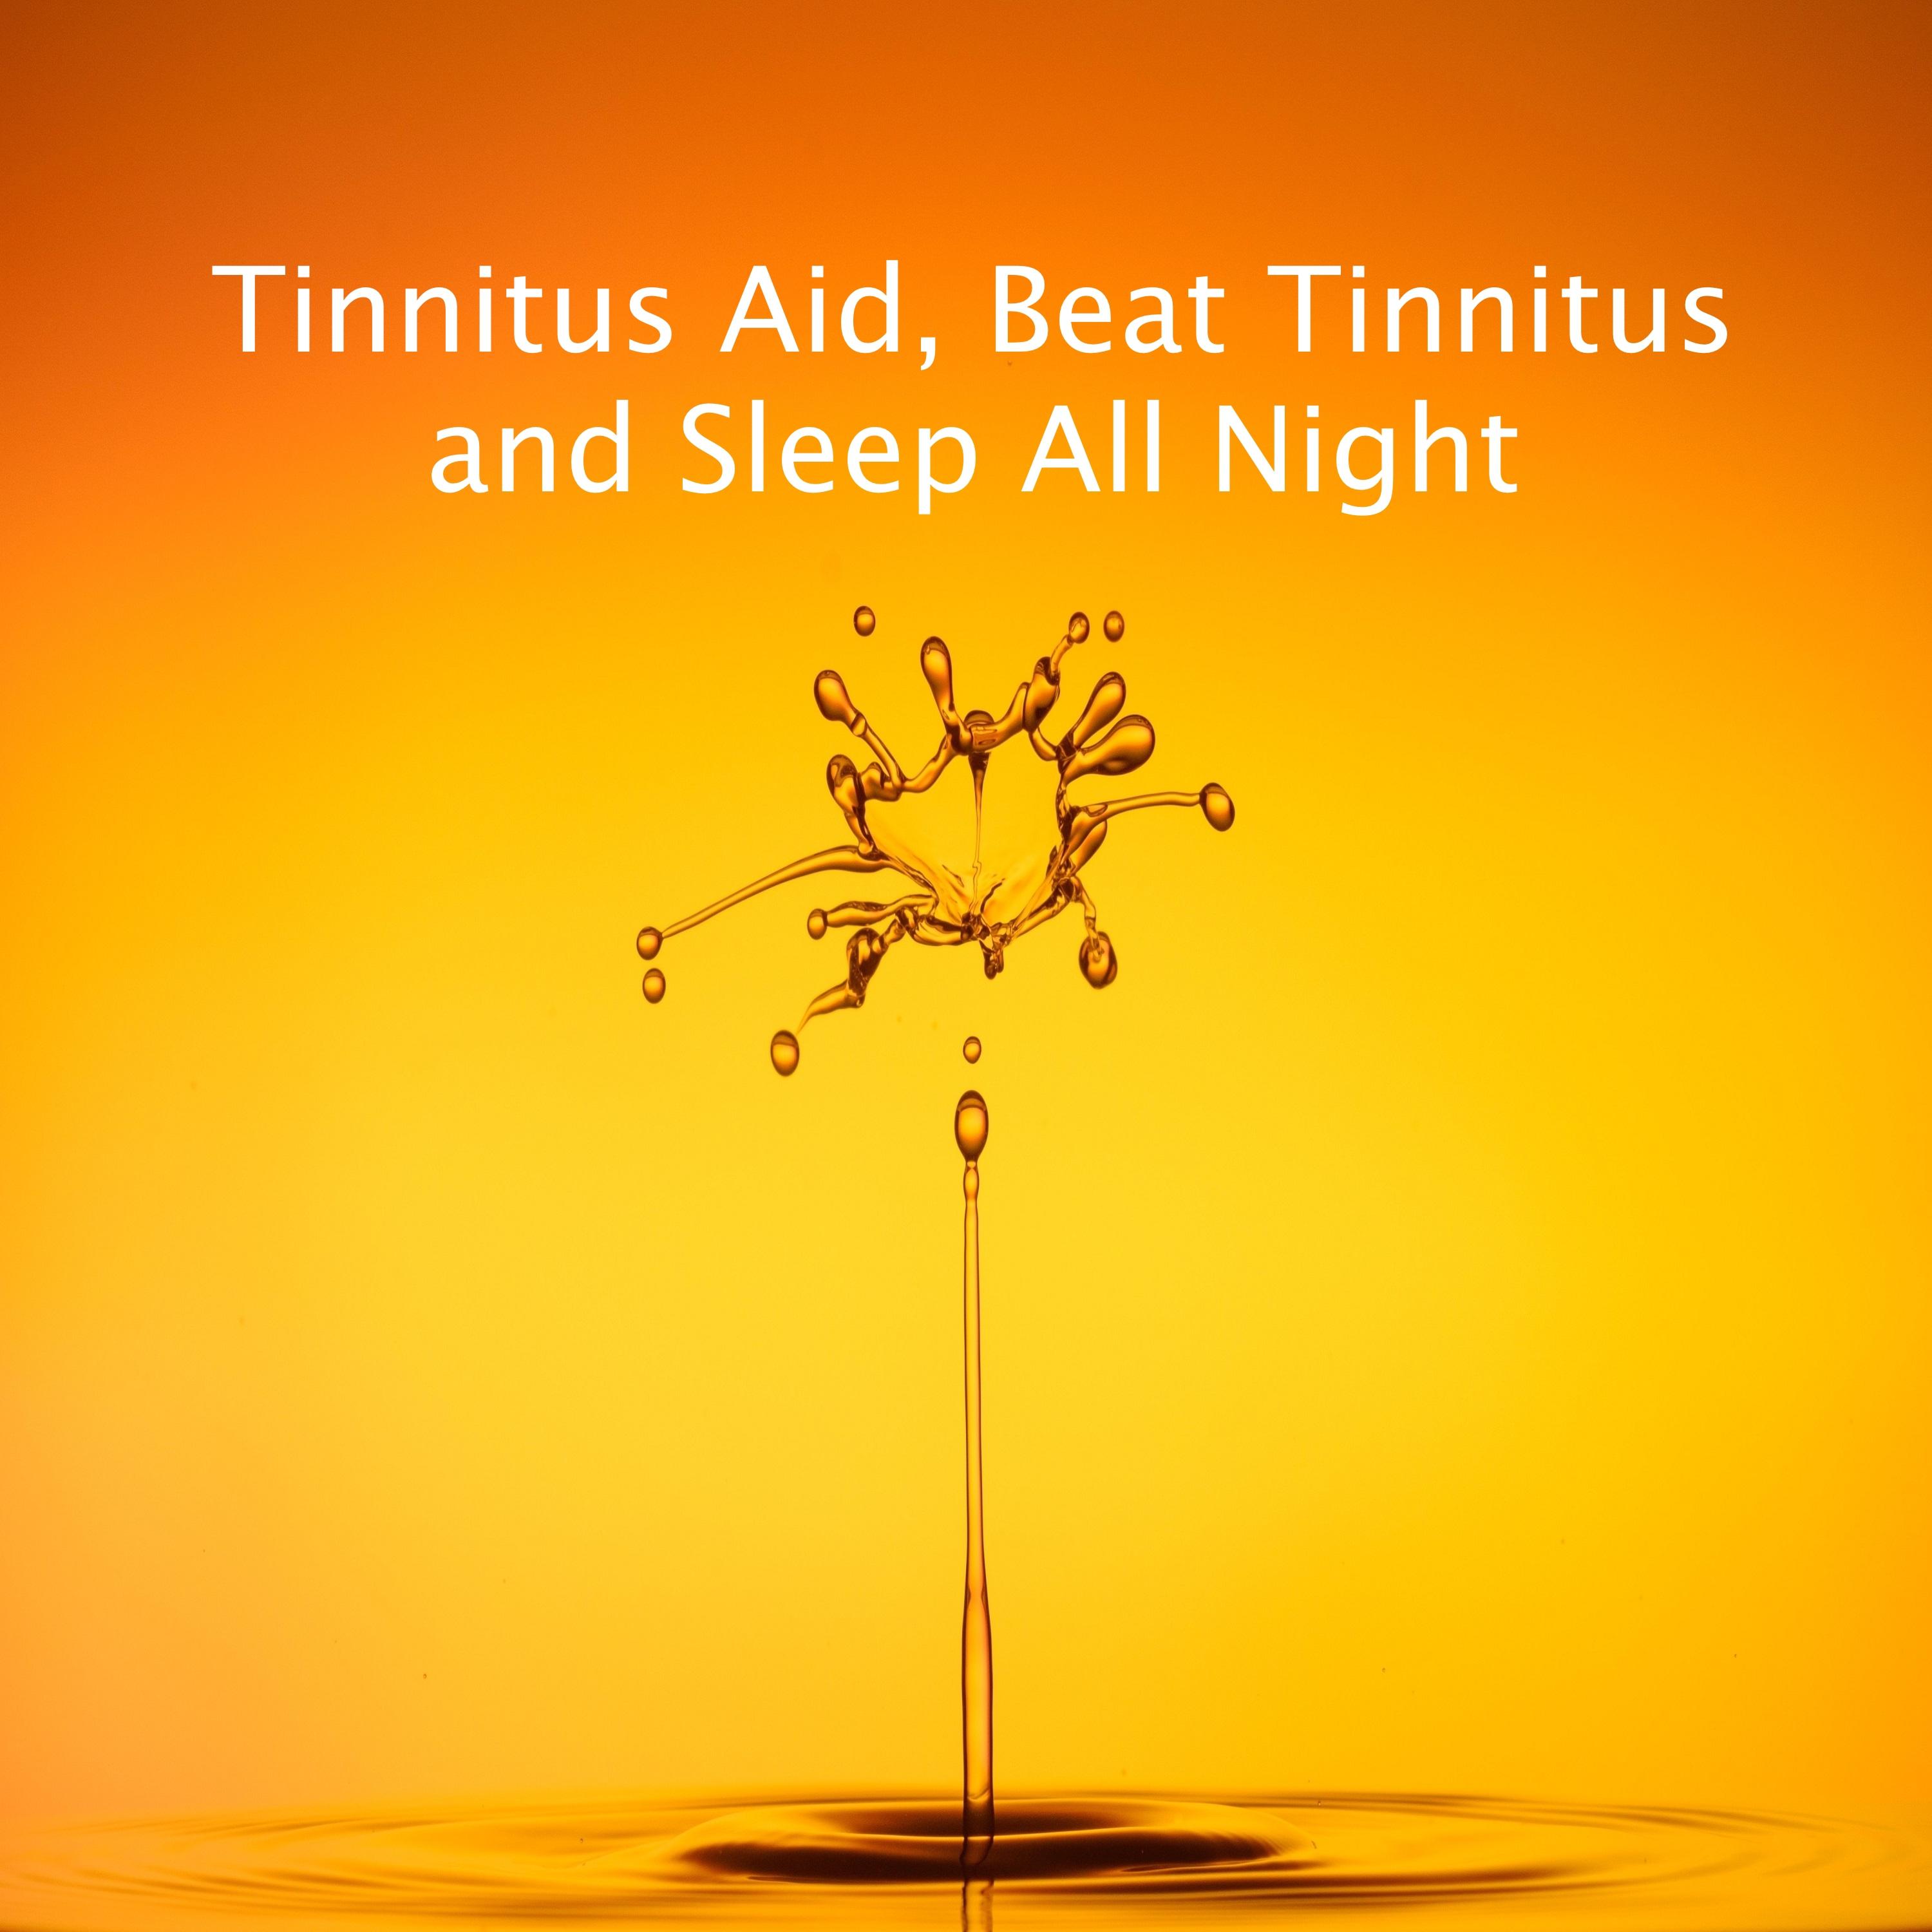 5 Loopable Tinnitus Aid Sounds, White Noise, Pink Noise, Brown Noise and Rain Sounds for Sleep